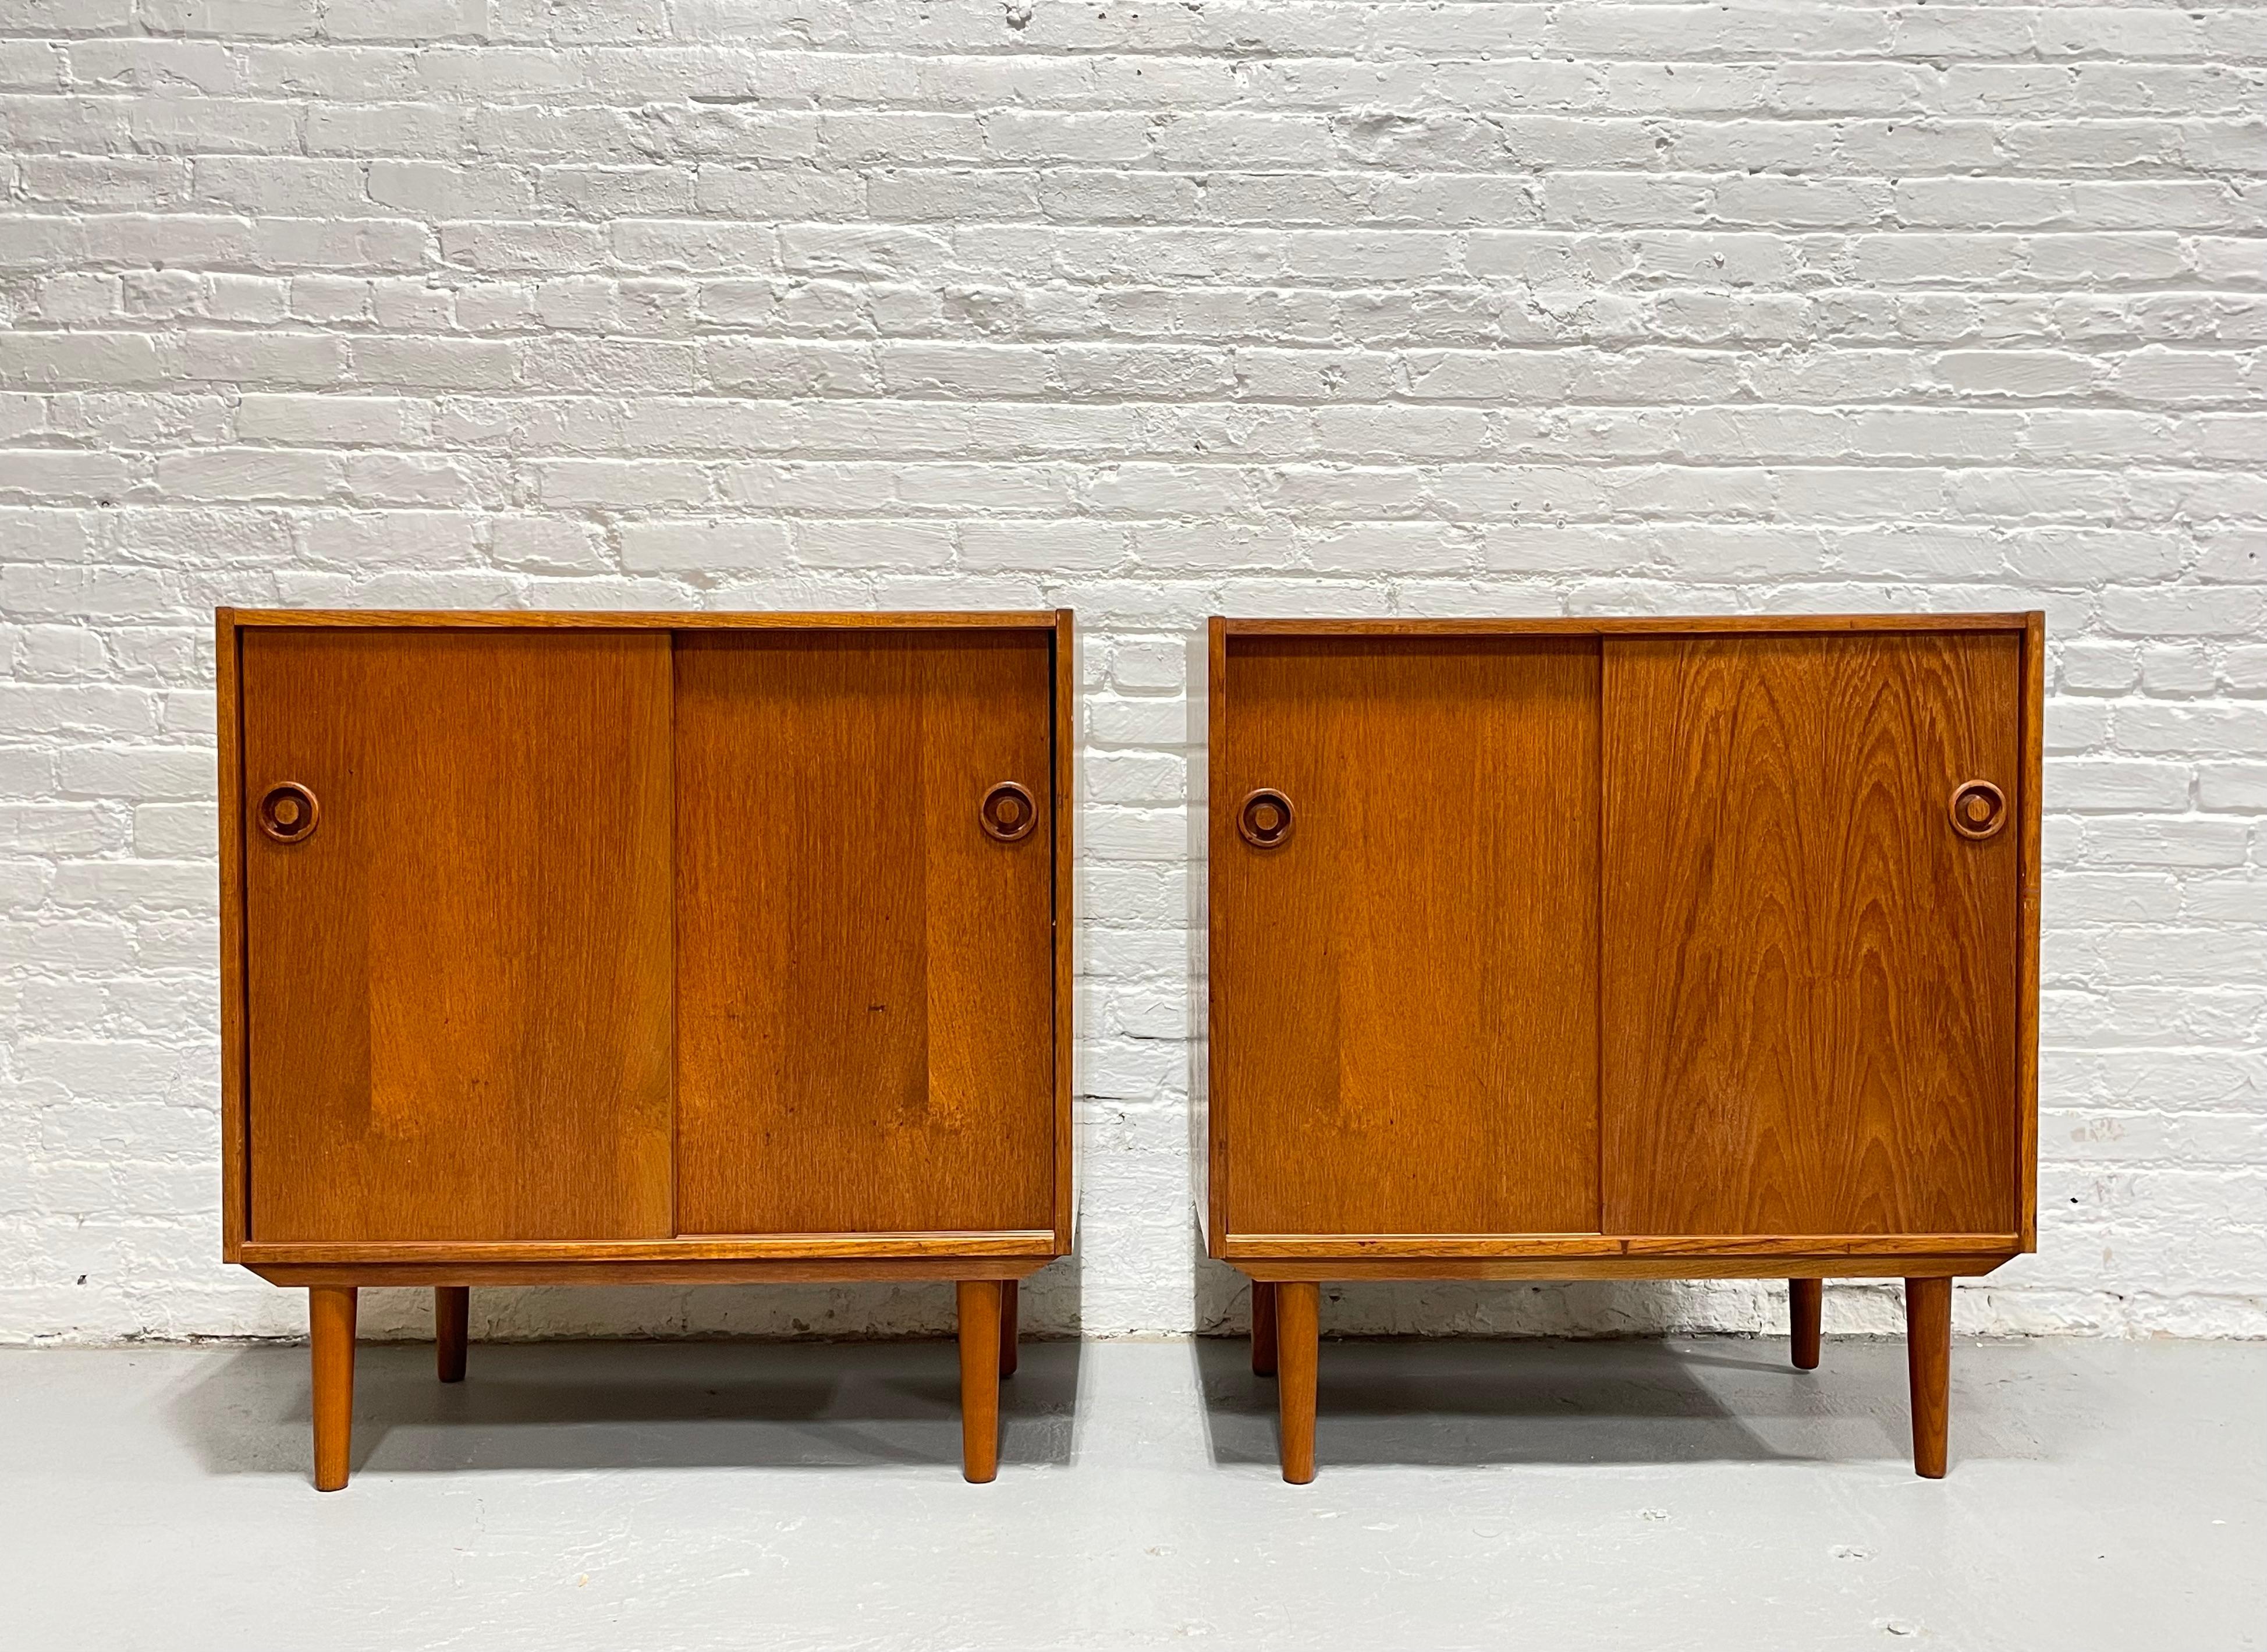 Pair of Mid Century Modern Teak Jr. Credenzas / Storage Cabinets, c. 1960's.  While small and streamlined, this pair offers a vast amount of storage space, enough for several components above and below the shelf if used as a media stand or